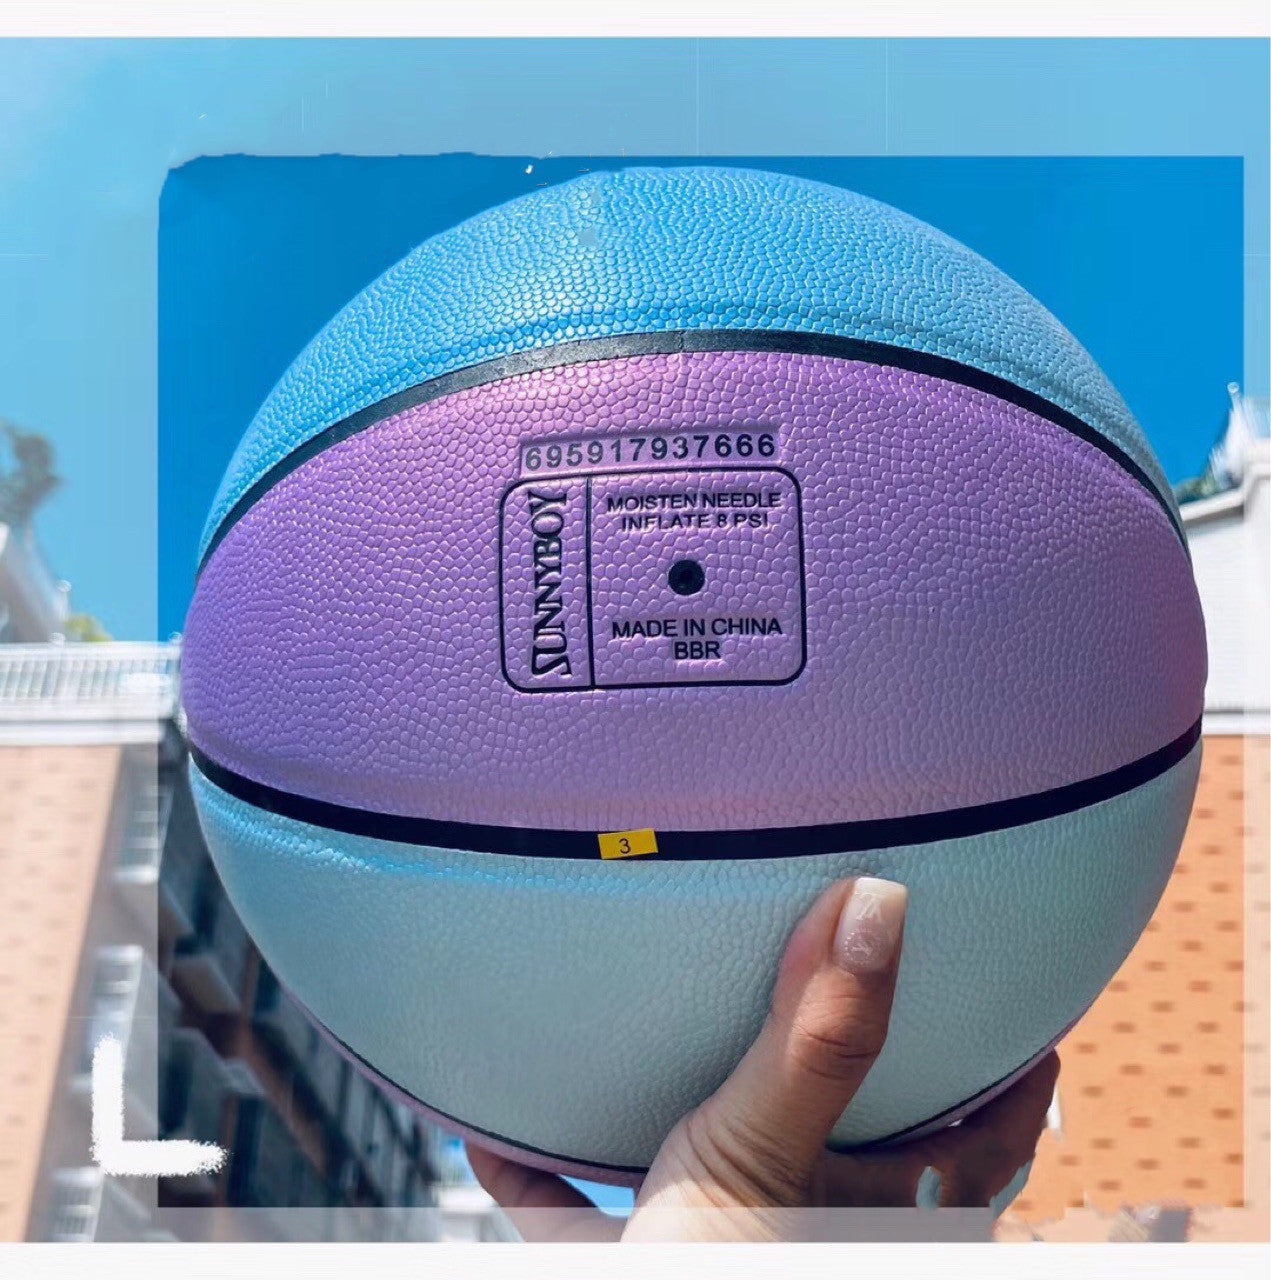 WILKYs0Chameleon smiley basketball
 Material: Rubber
 
 Applicable scenarios: running sports, fitness equipment
 
 Basketball size: No. 7 basketball (standard ball)
 
 
 
 
 
 
 
